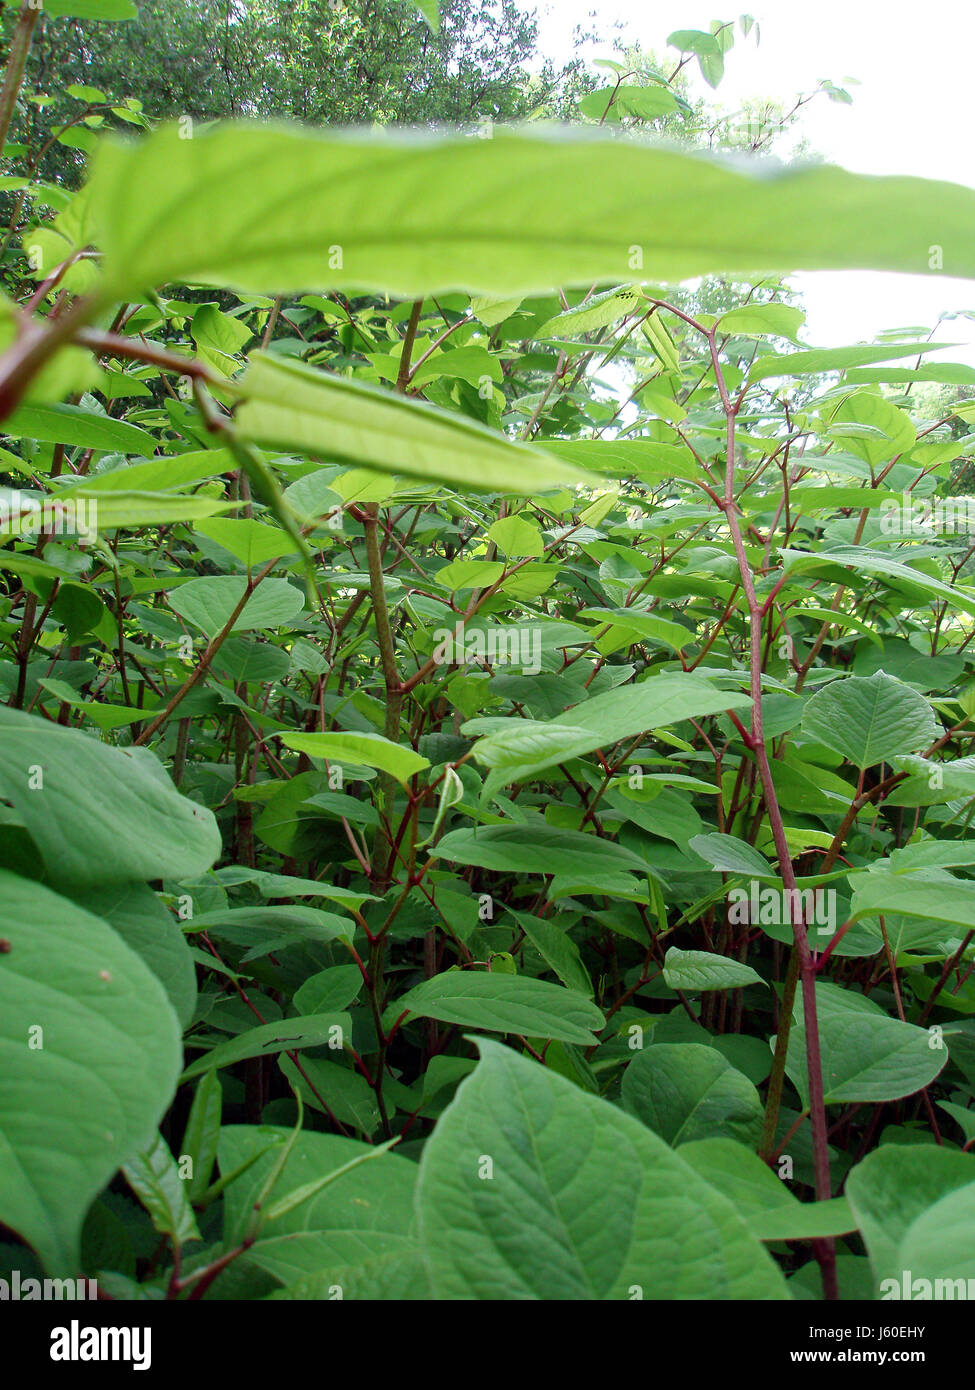 asiatic plant plant flora asiatic japanese threatens vegetable immigrant Stock Photo